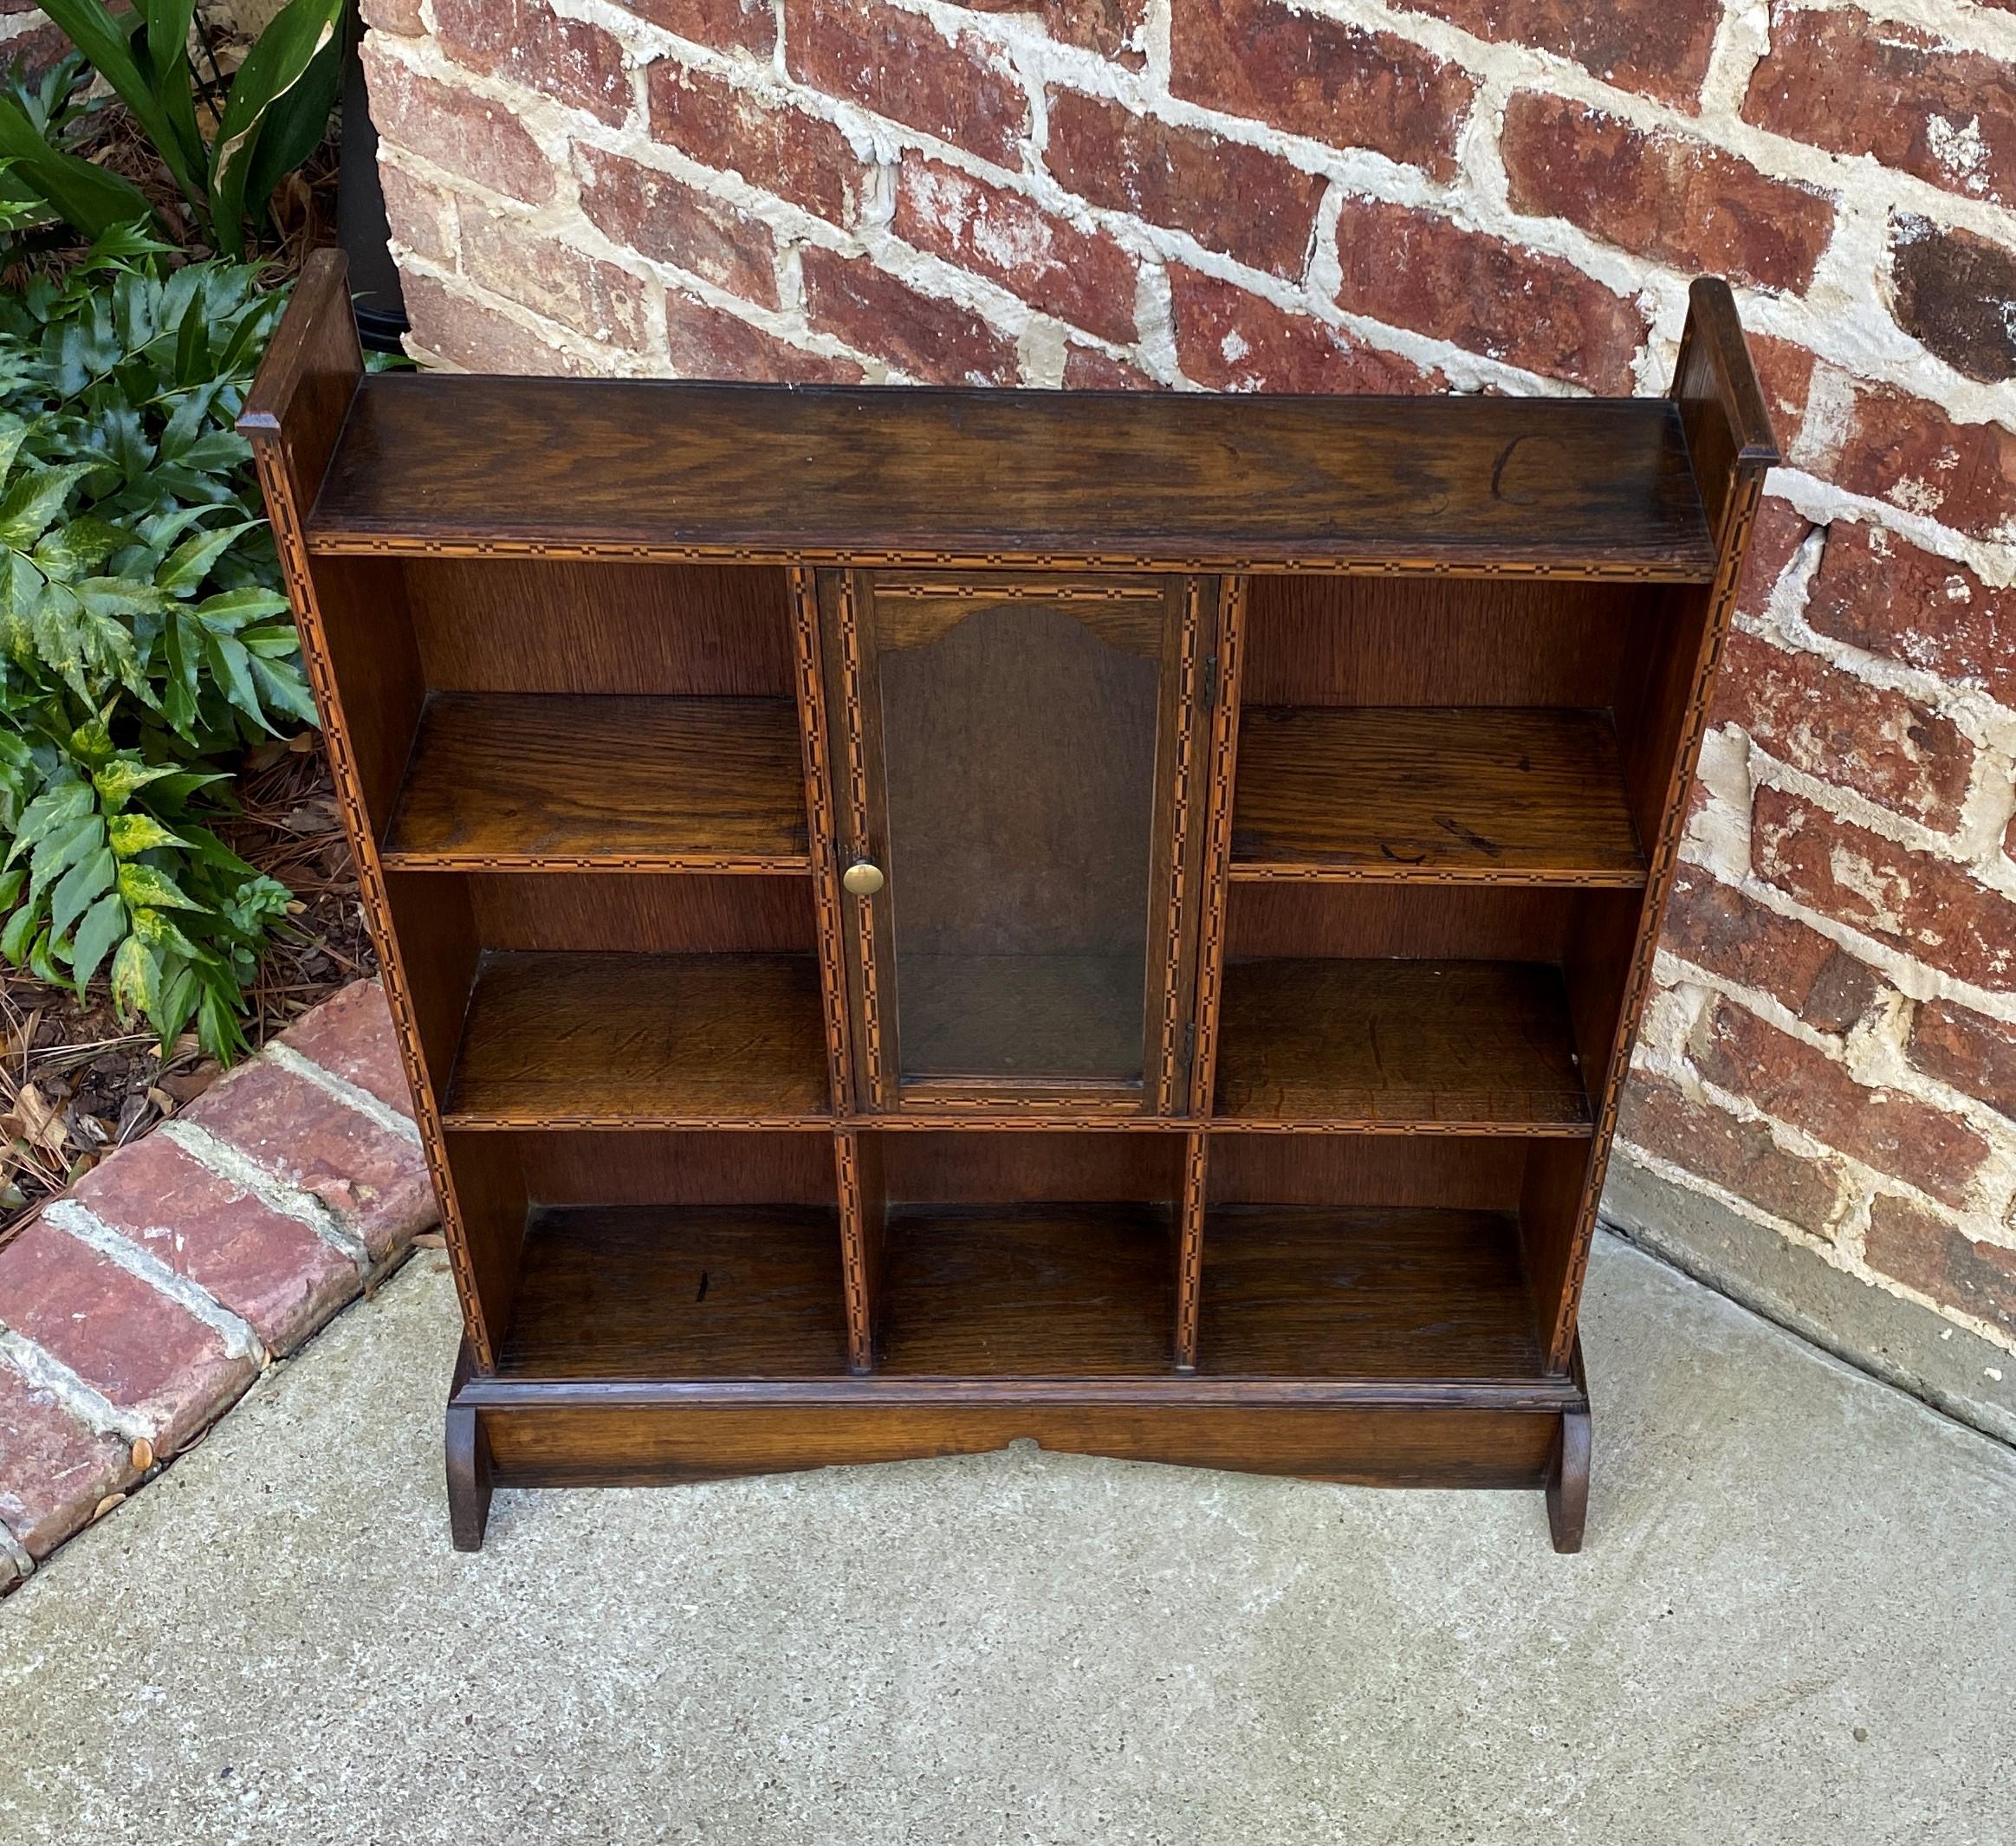 Early 20th Century Antique English Oak Display Shelf Cabinet Bookcase Freestanding Inlaid, c. 1920